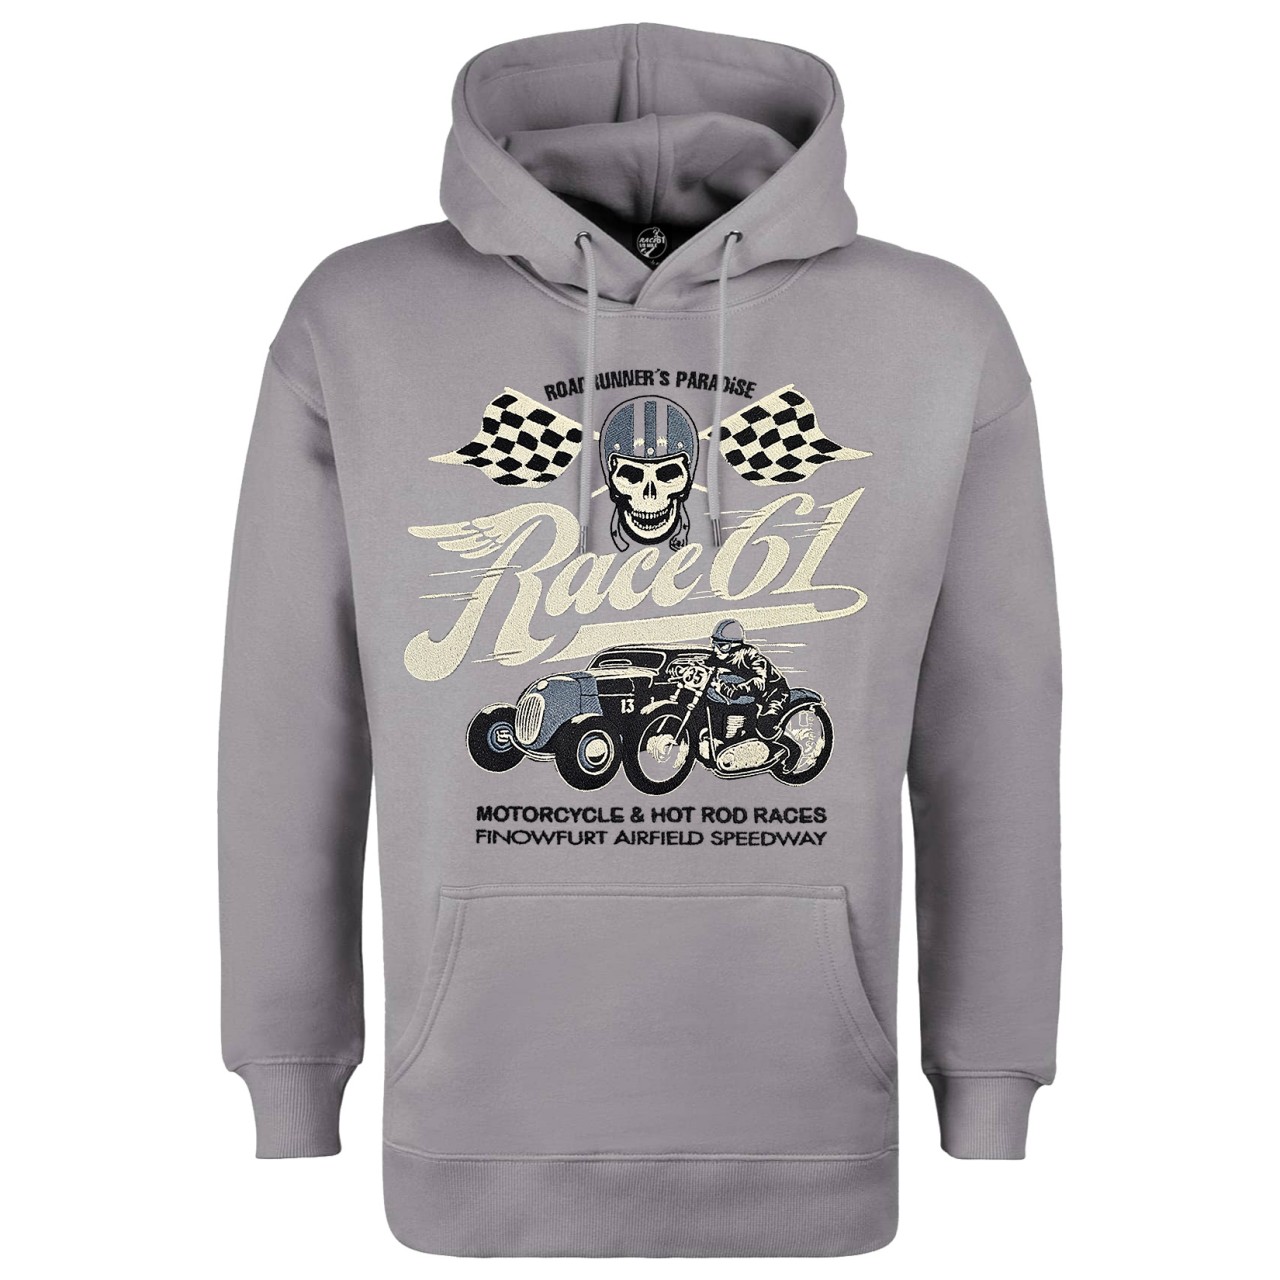 Race 61 Oversized Hoodie Motorcycle & Hot Rod Races mit Stick